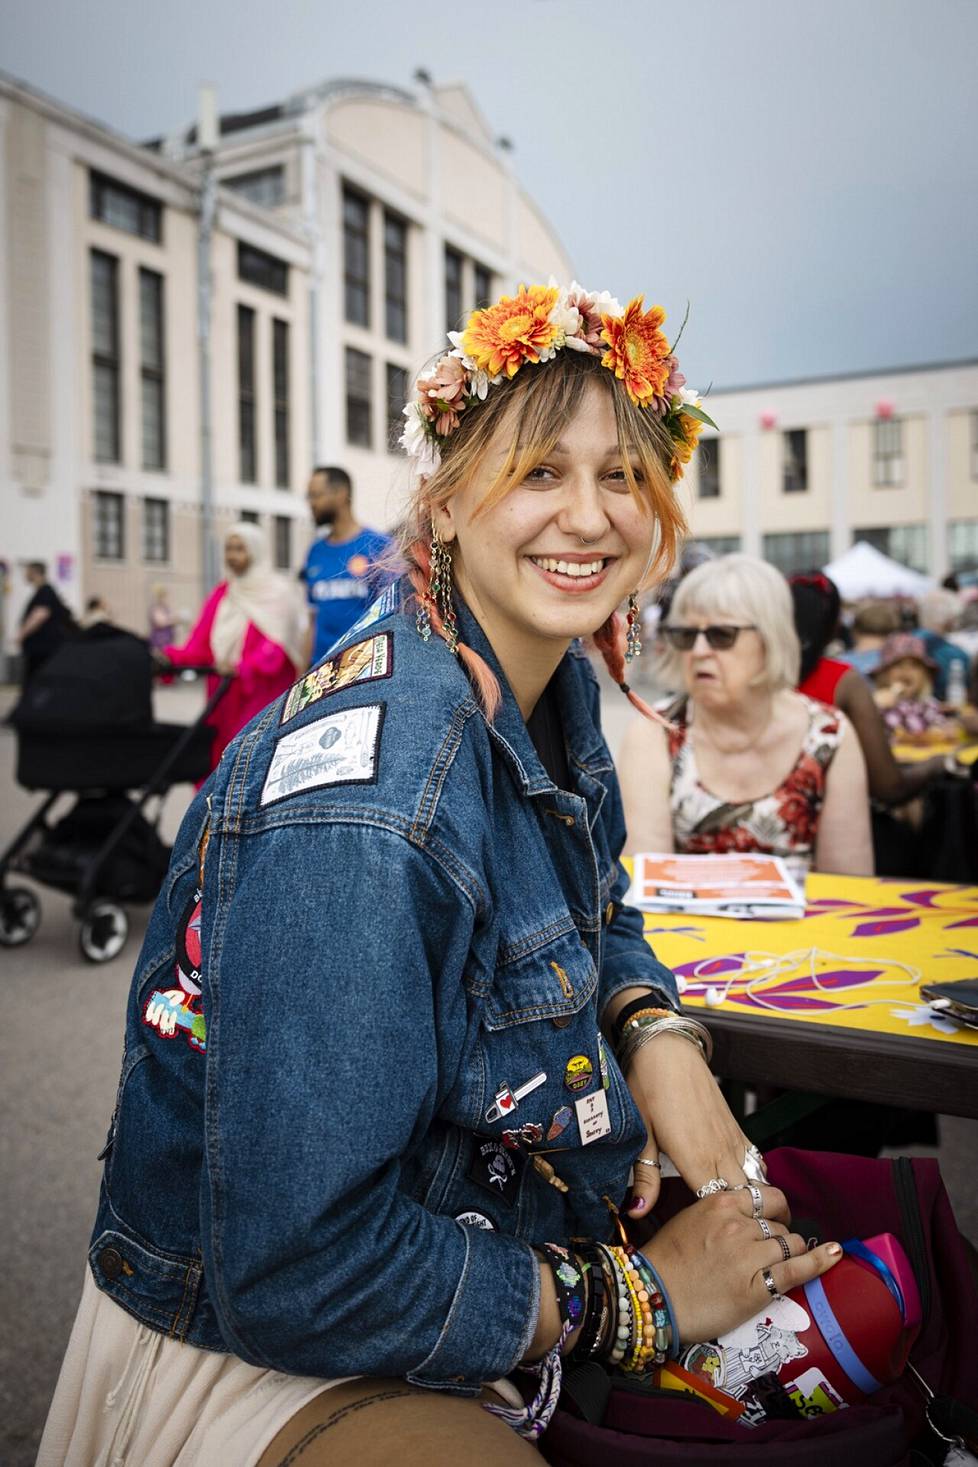 Sharon Freystaetter from New York has a denim jacket in which she has put souvenirs from the places she has visited.  He made the flower garland himself on Saturday at Teurastamo's spring party.